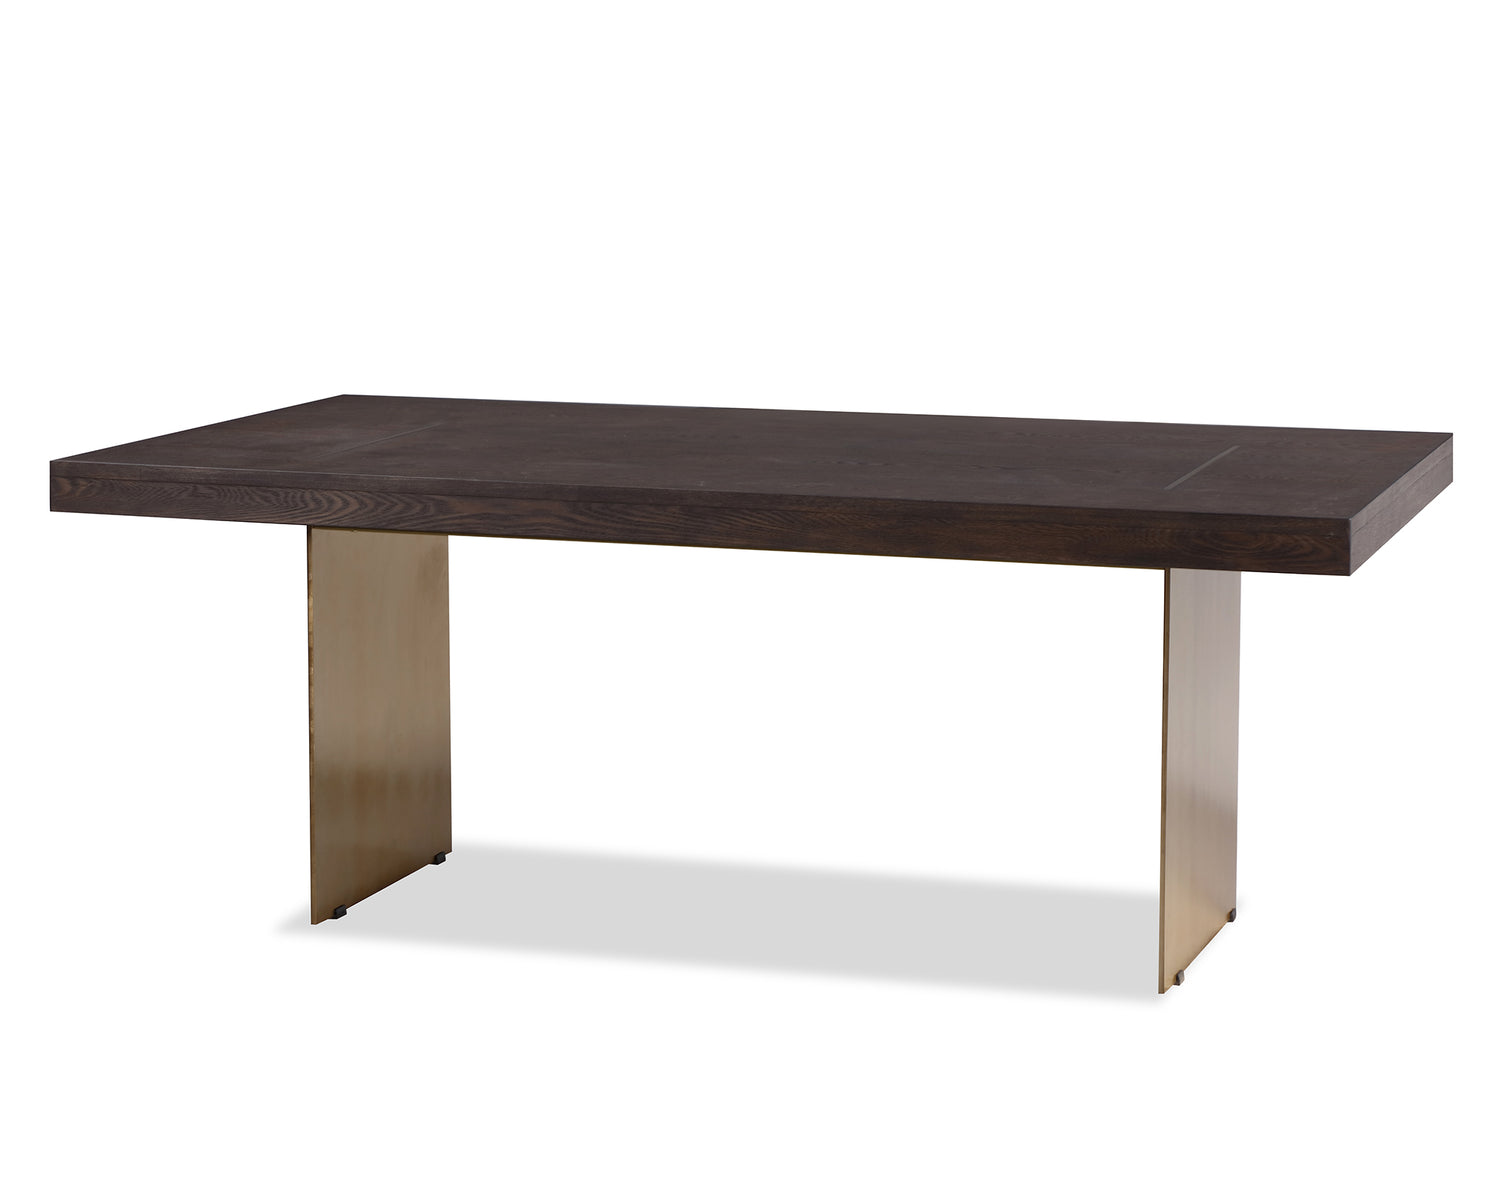  LiangAndEimil-Liang & Eimil Unma Dining Table Dark Brown- 77 